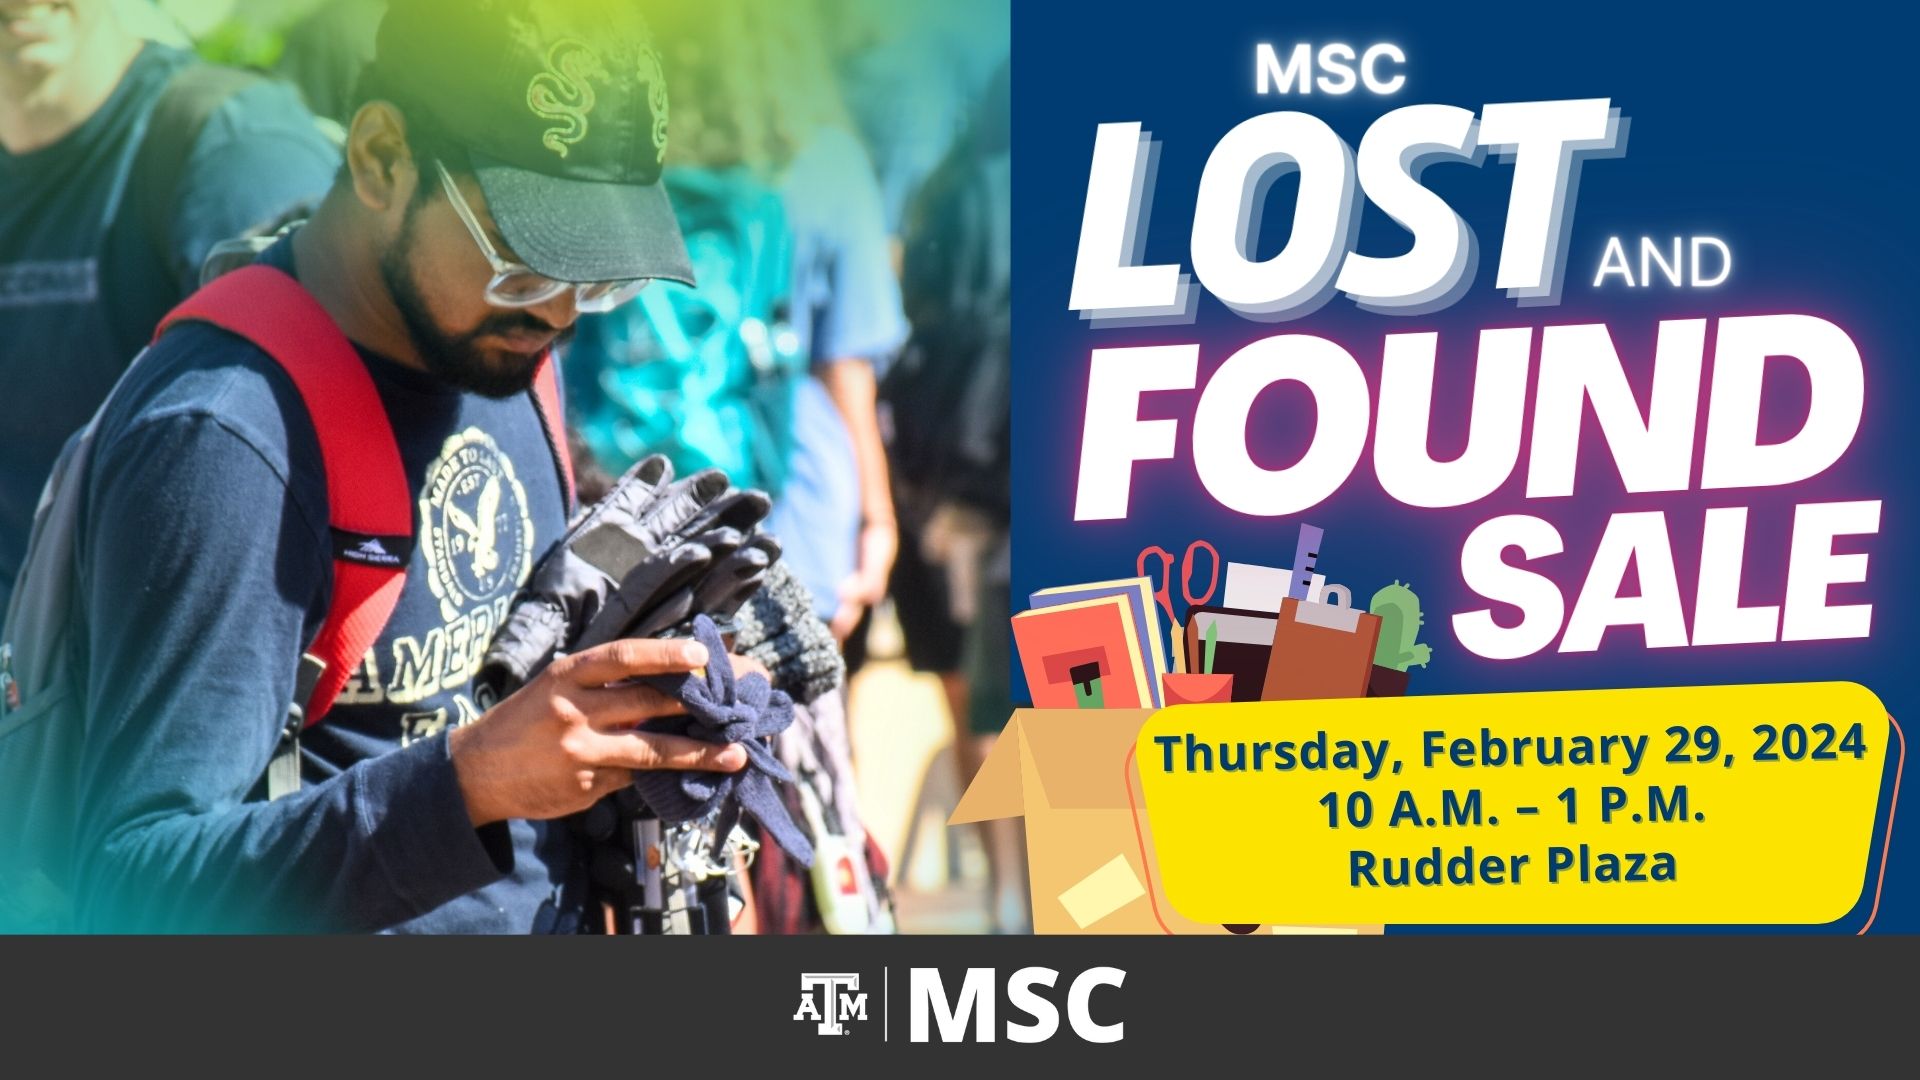 MSC Lost and Found Sale, Thursday, February 29, 2024 from 10 a.m. to 1 p.m. at Rudder Plaza